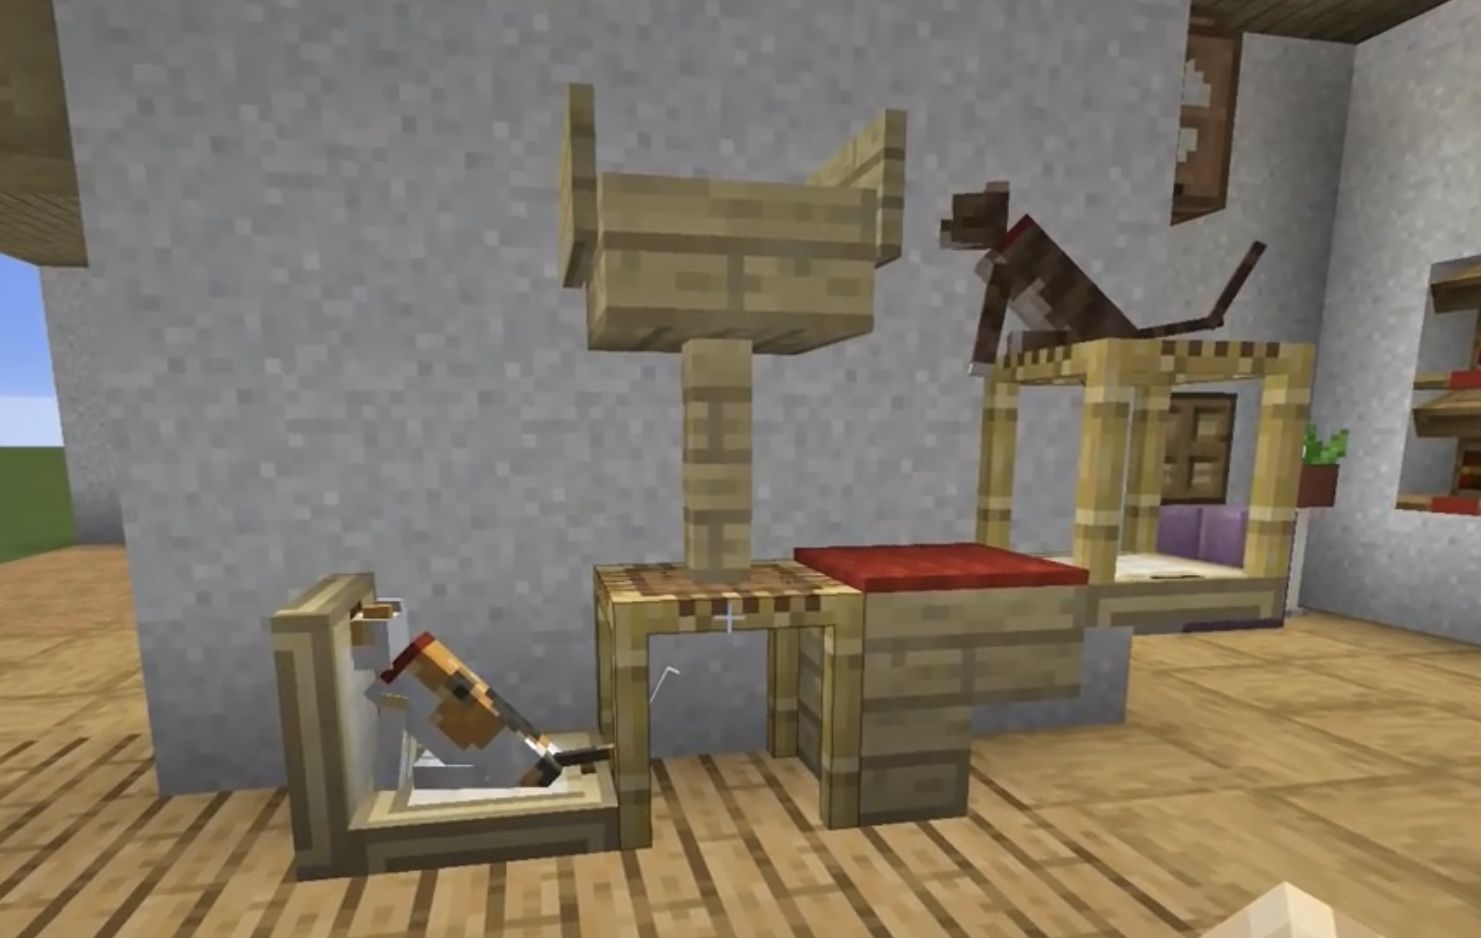 inthelinedesign: Minecraft Cat House Tutorial